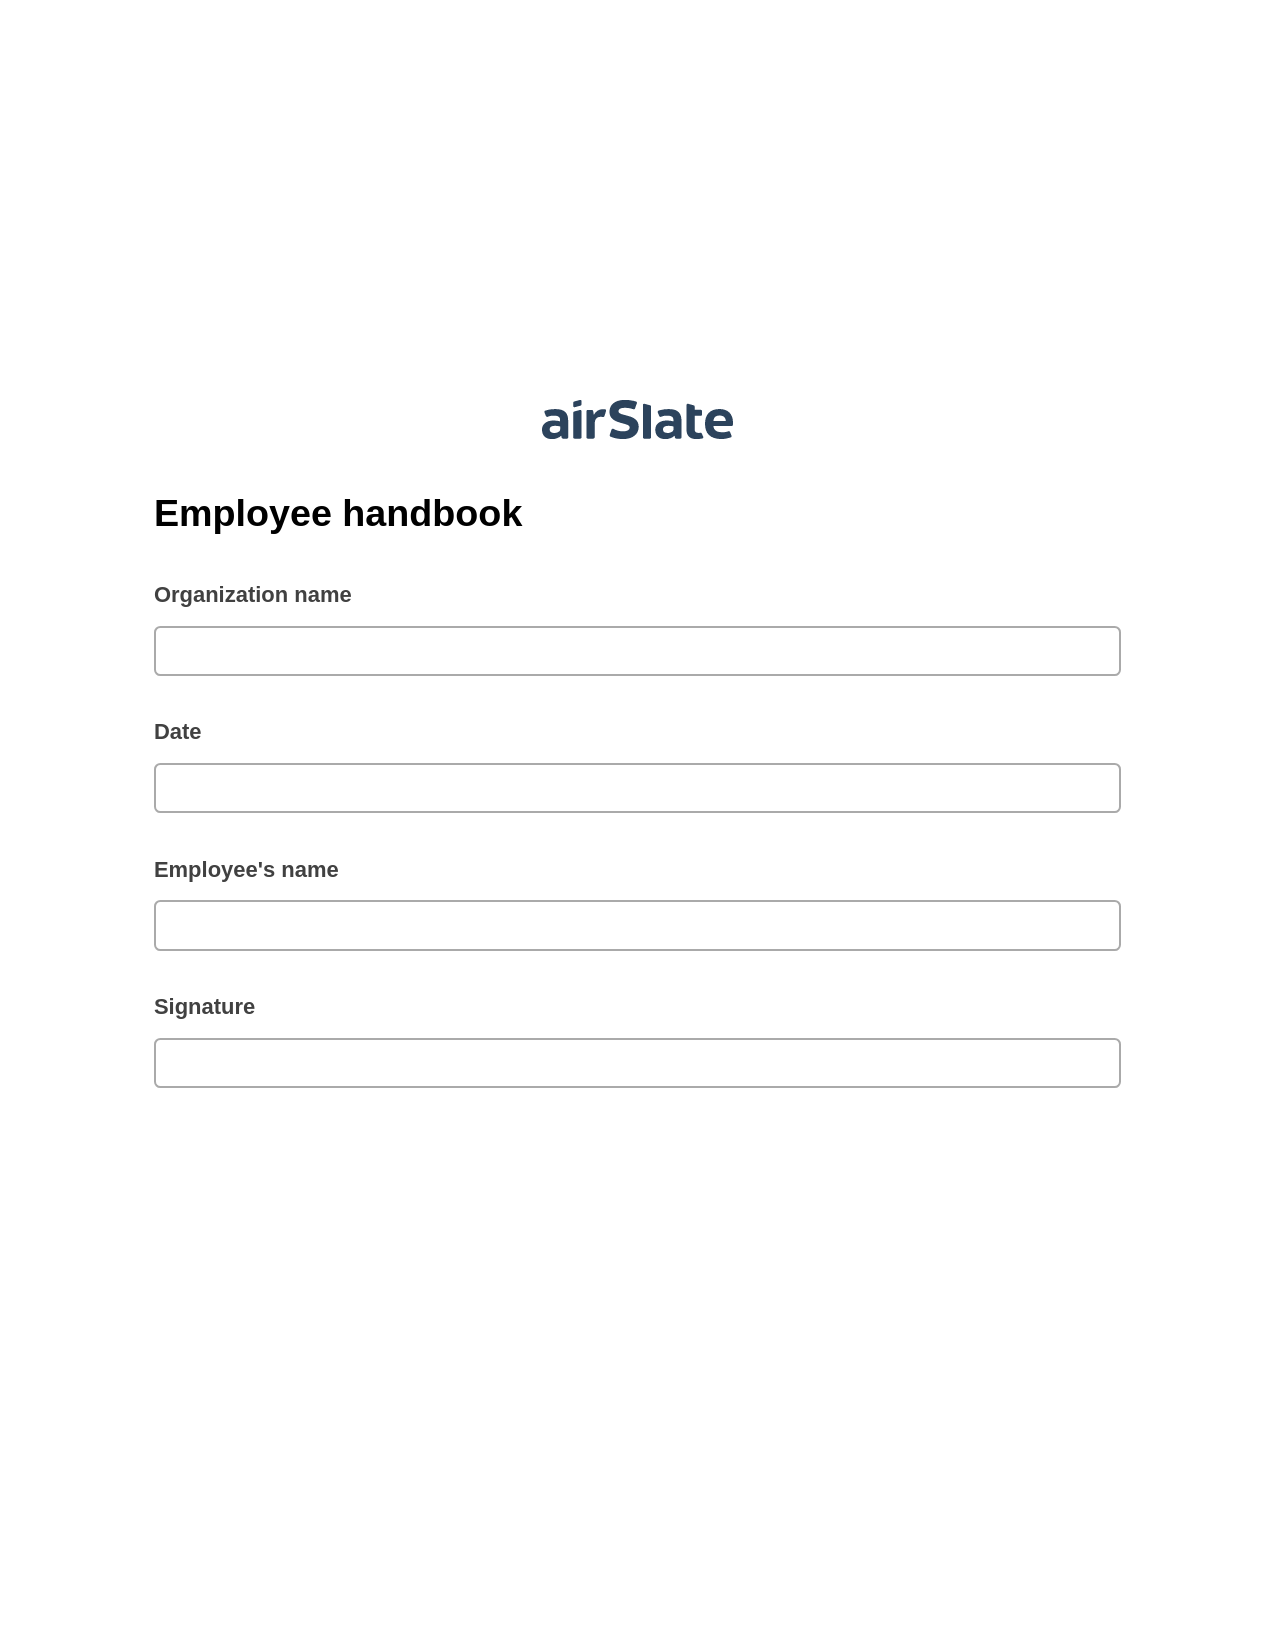 Multirole Employee handbook Pre-fill from Google Sheets Bot, Create slate addon, Export to NetSuite Record Bot